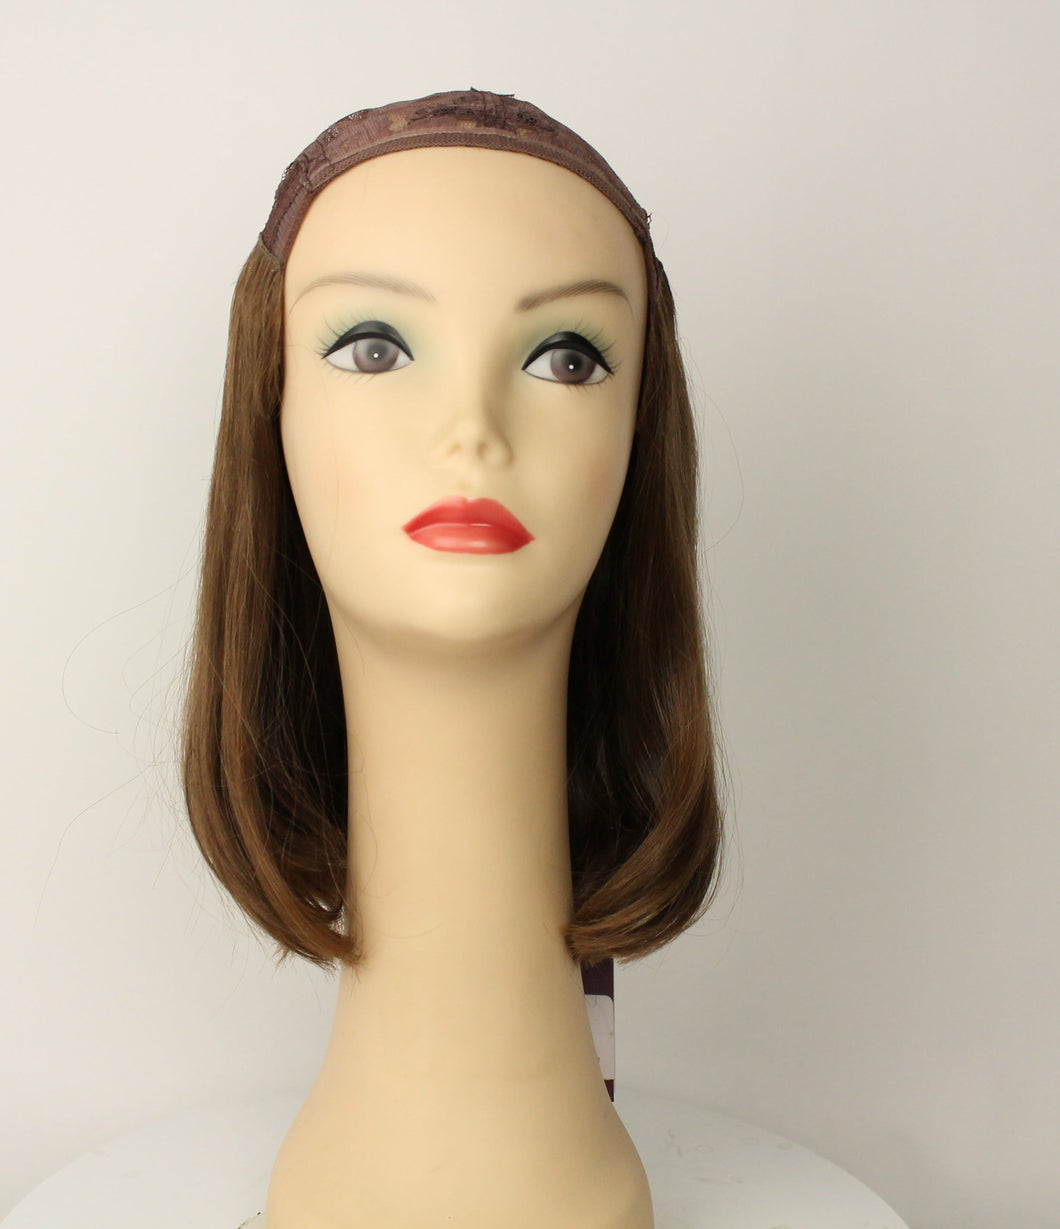 Hat Fall Avalon Light Brown With Highlights Size X-L 12''